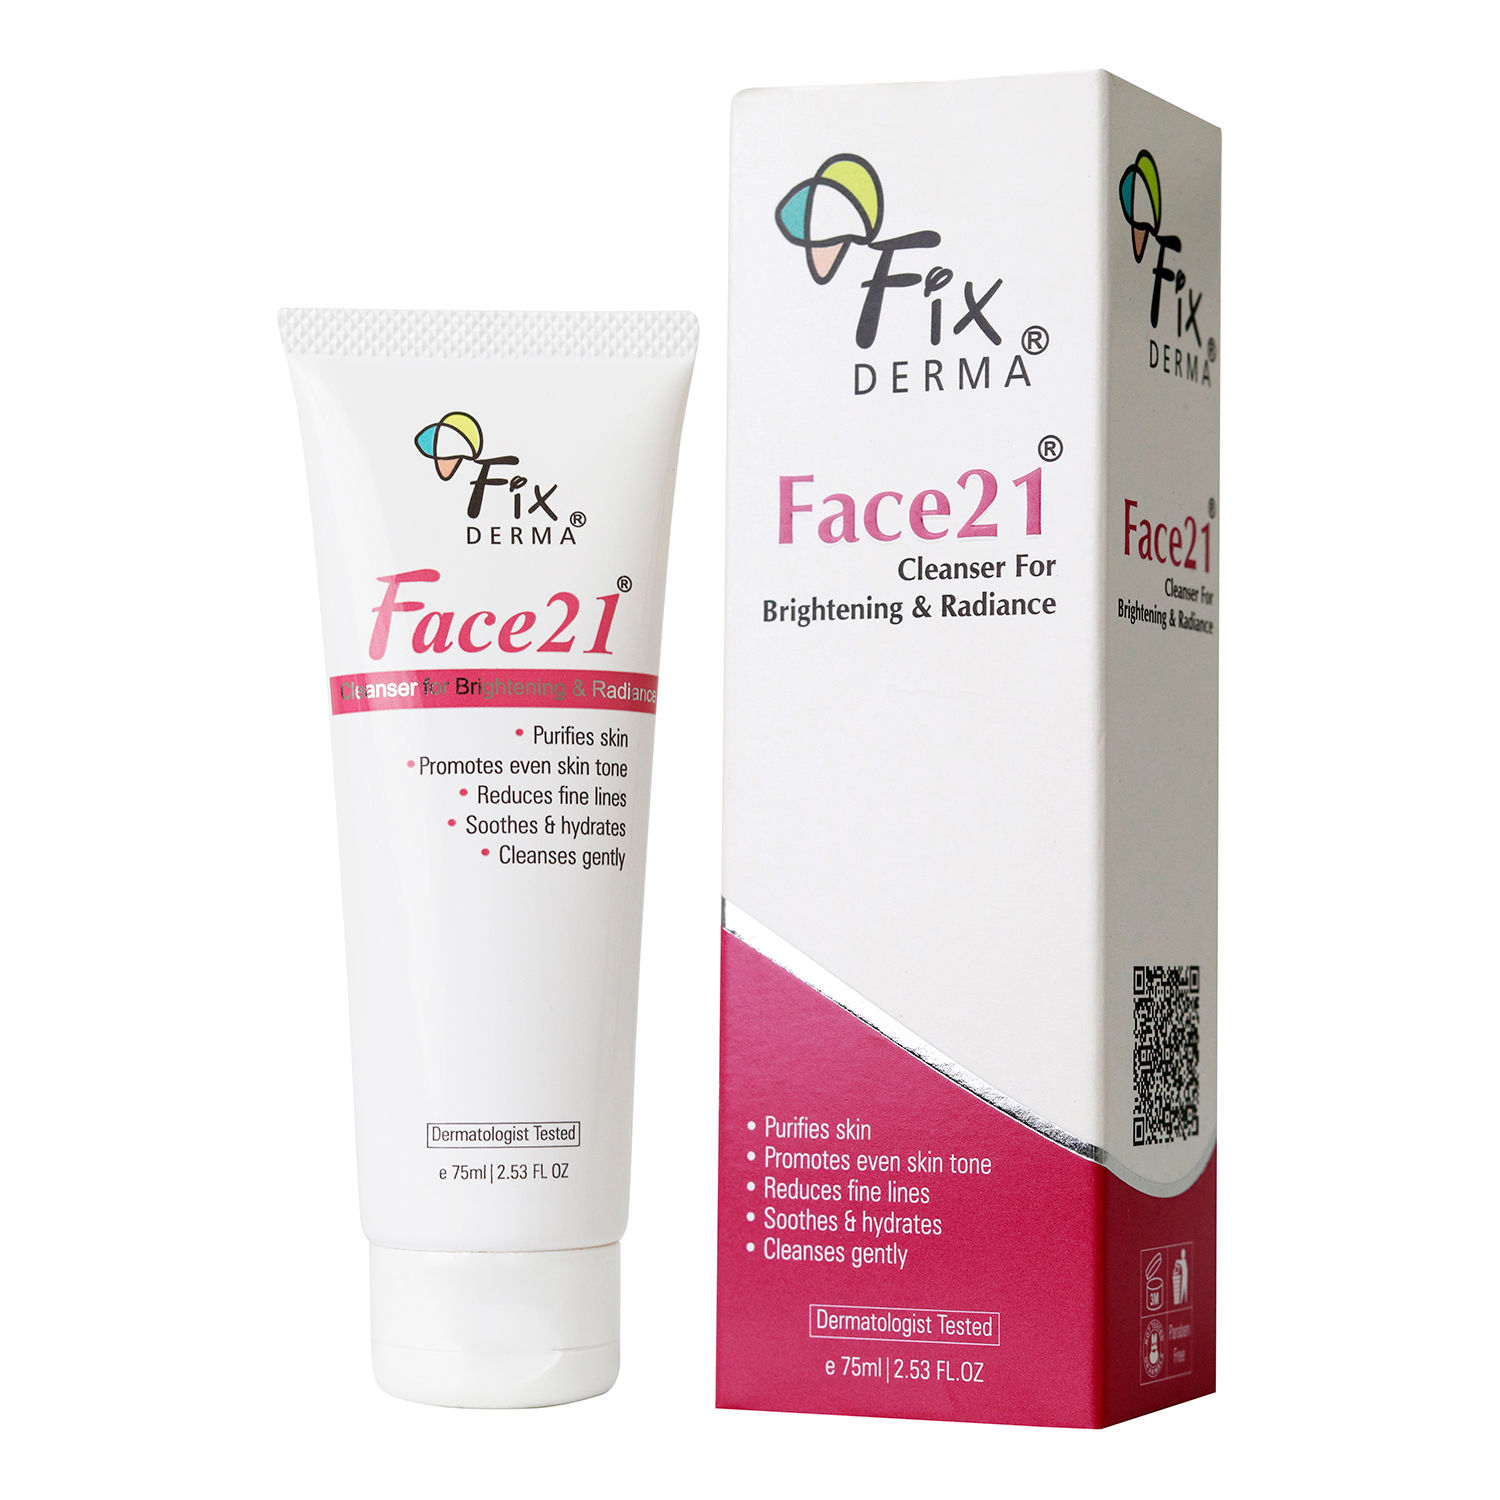 Buy Fixderma Face21 Cleanser, Skin Brightening Cleanser, Exfoliates Dead Cells, Remove Pigmentation, Reduces Wrinkles & Fine Lines, Evens Skin Tone, Purifies Skin, 75ml - Purplle